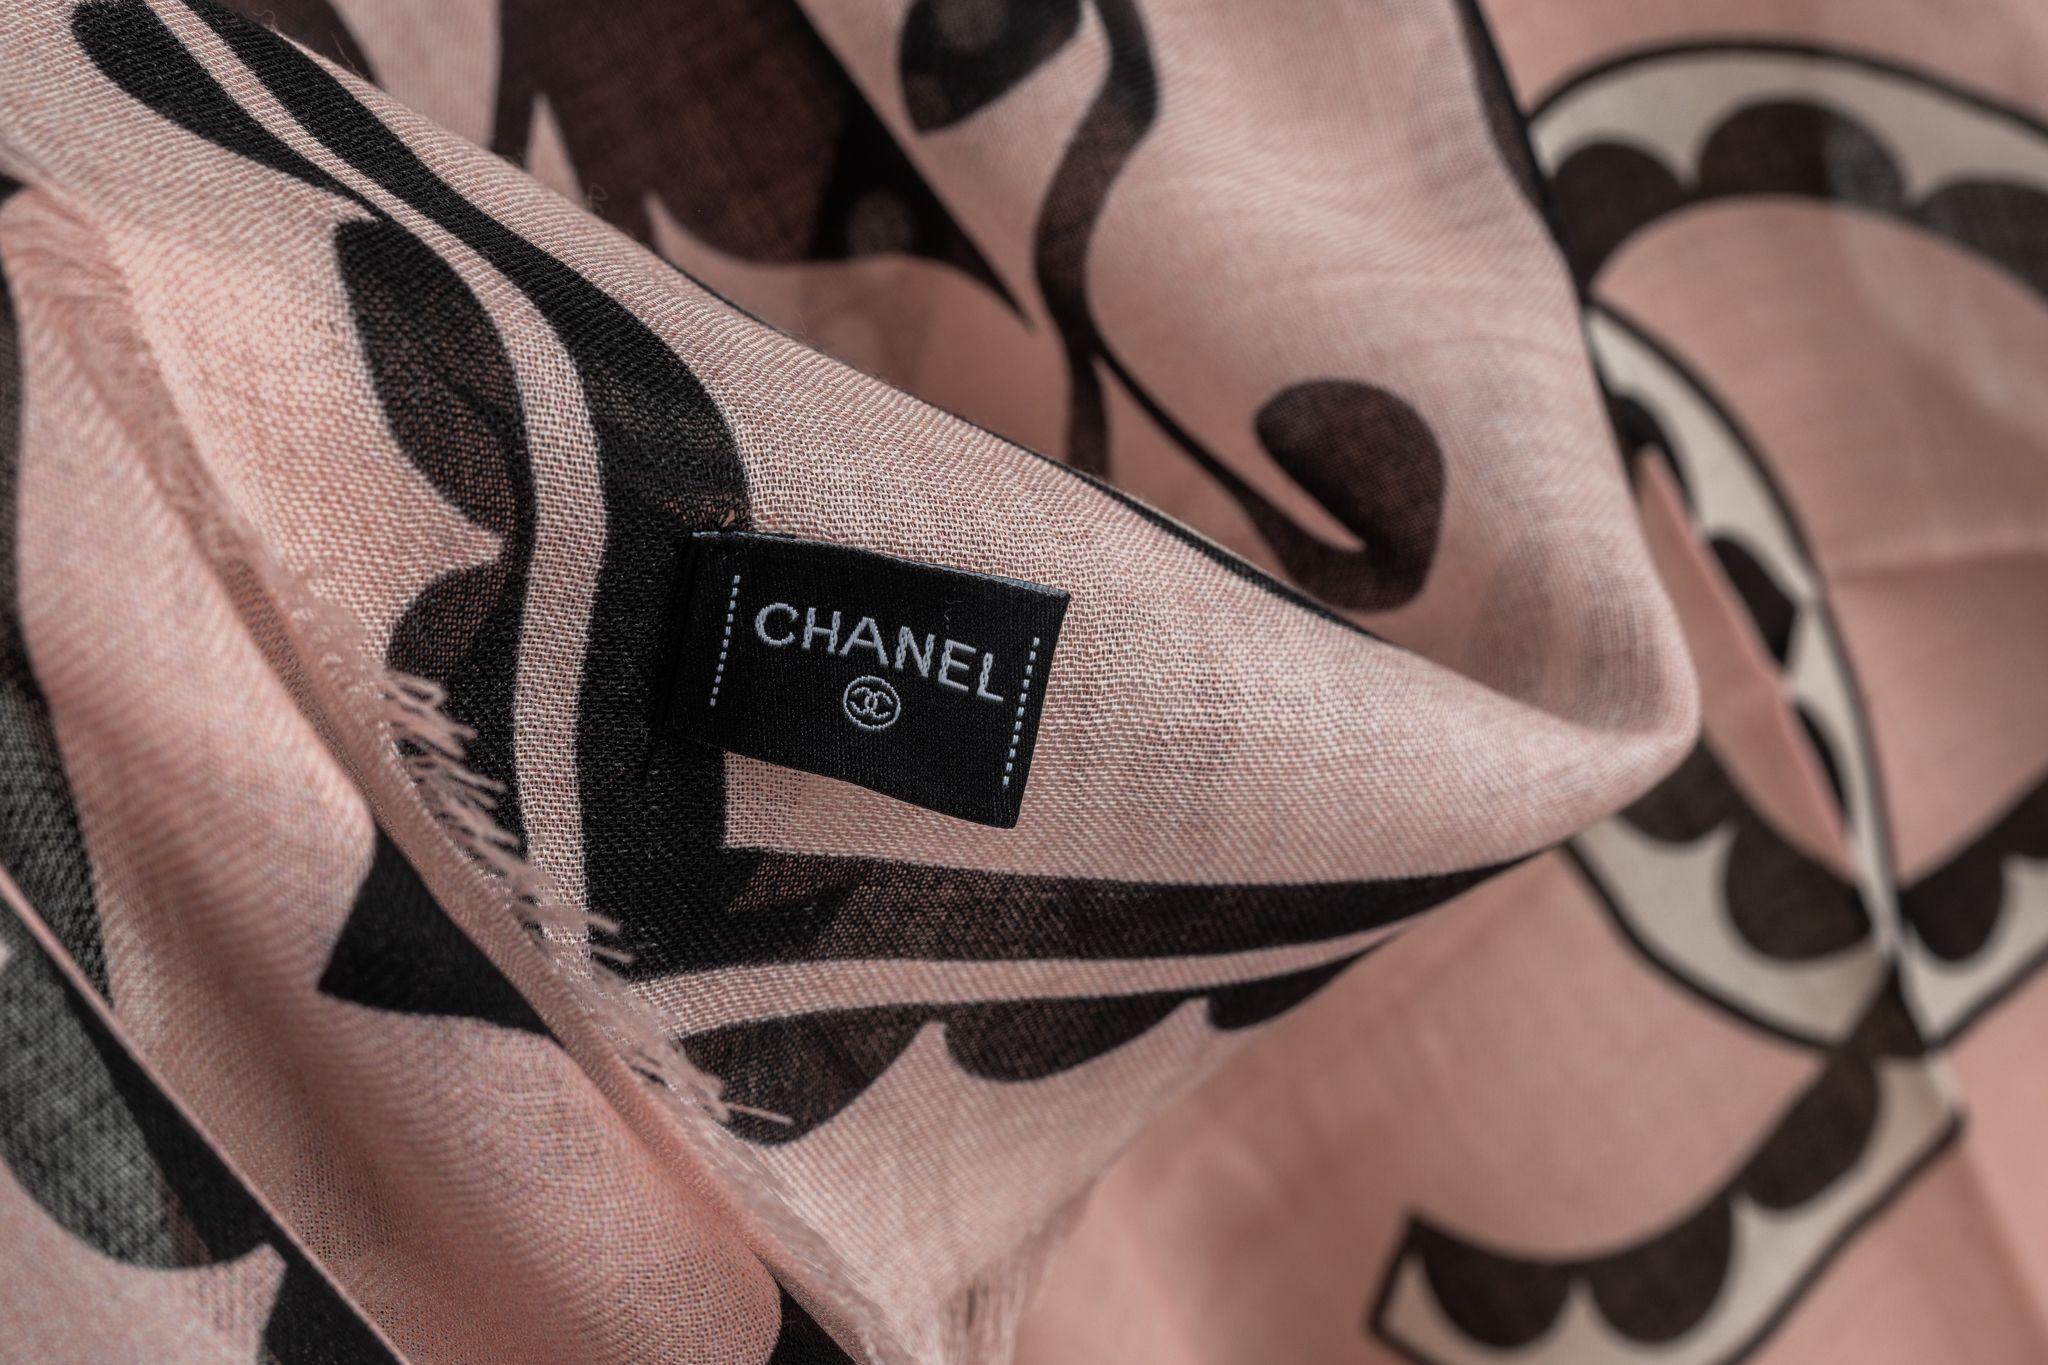 Chanel Cashmere Shawl in Rosé. the pattern features a big CC logo in the center surrounded by a flower arrangement. The item is in new condition.